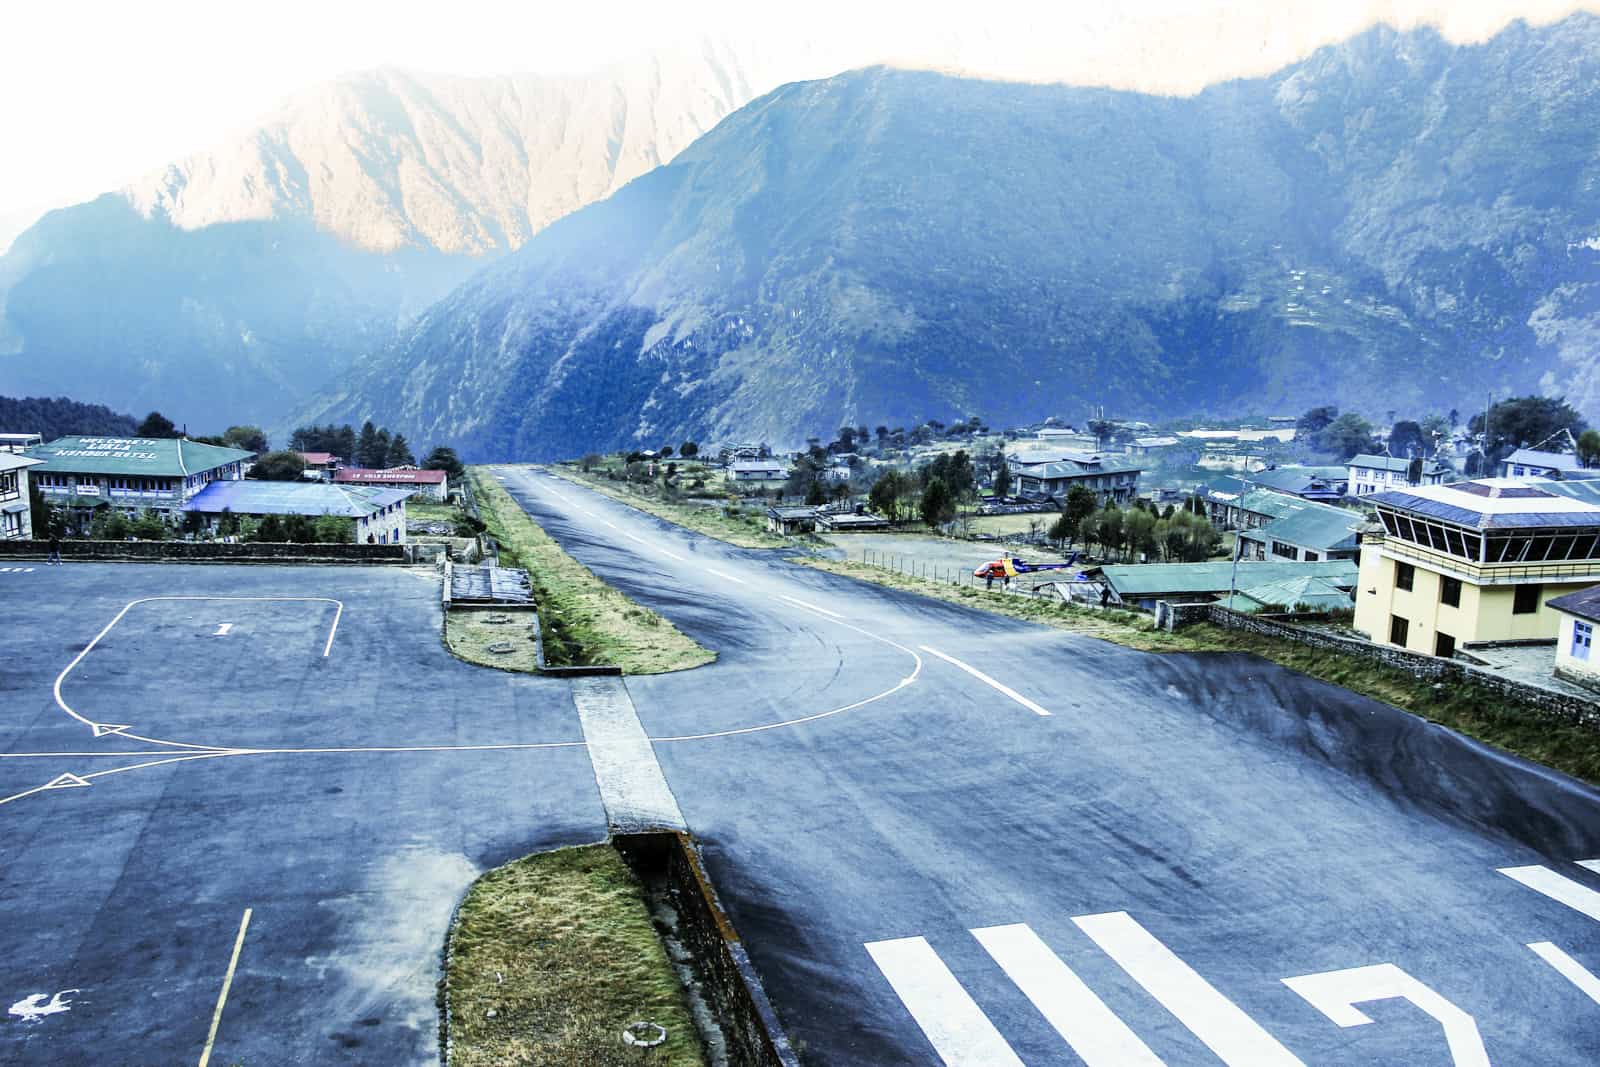 The famously short mountain-side runway at Lukla airport in Nepal, which is super close to the Himalaya mountain range that surrounds it